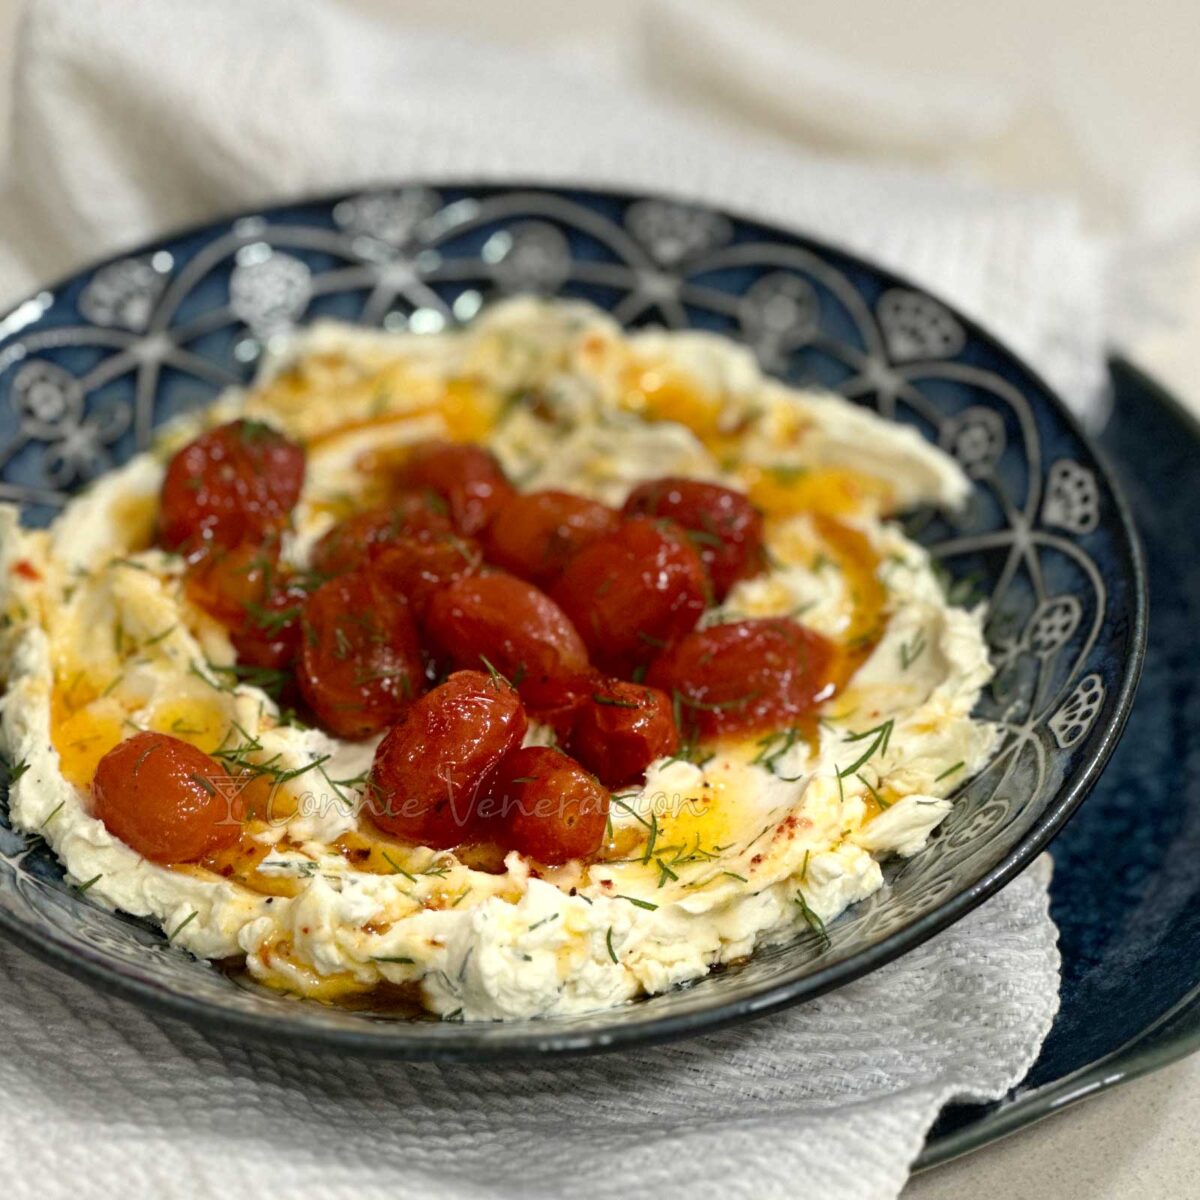 Cream cheese and roasted tomatoes dip